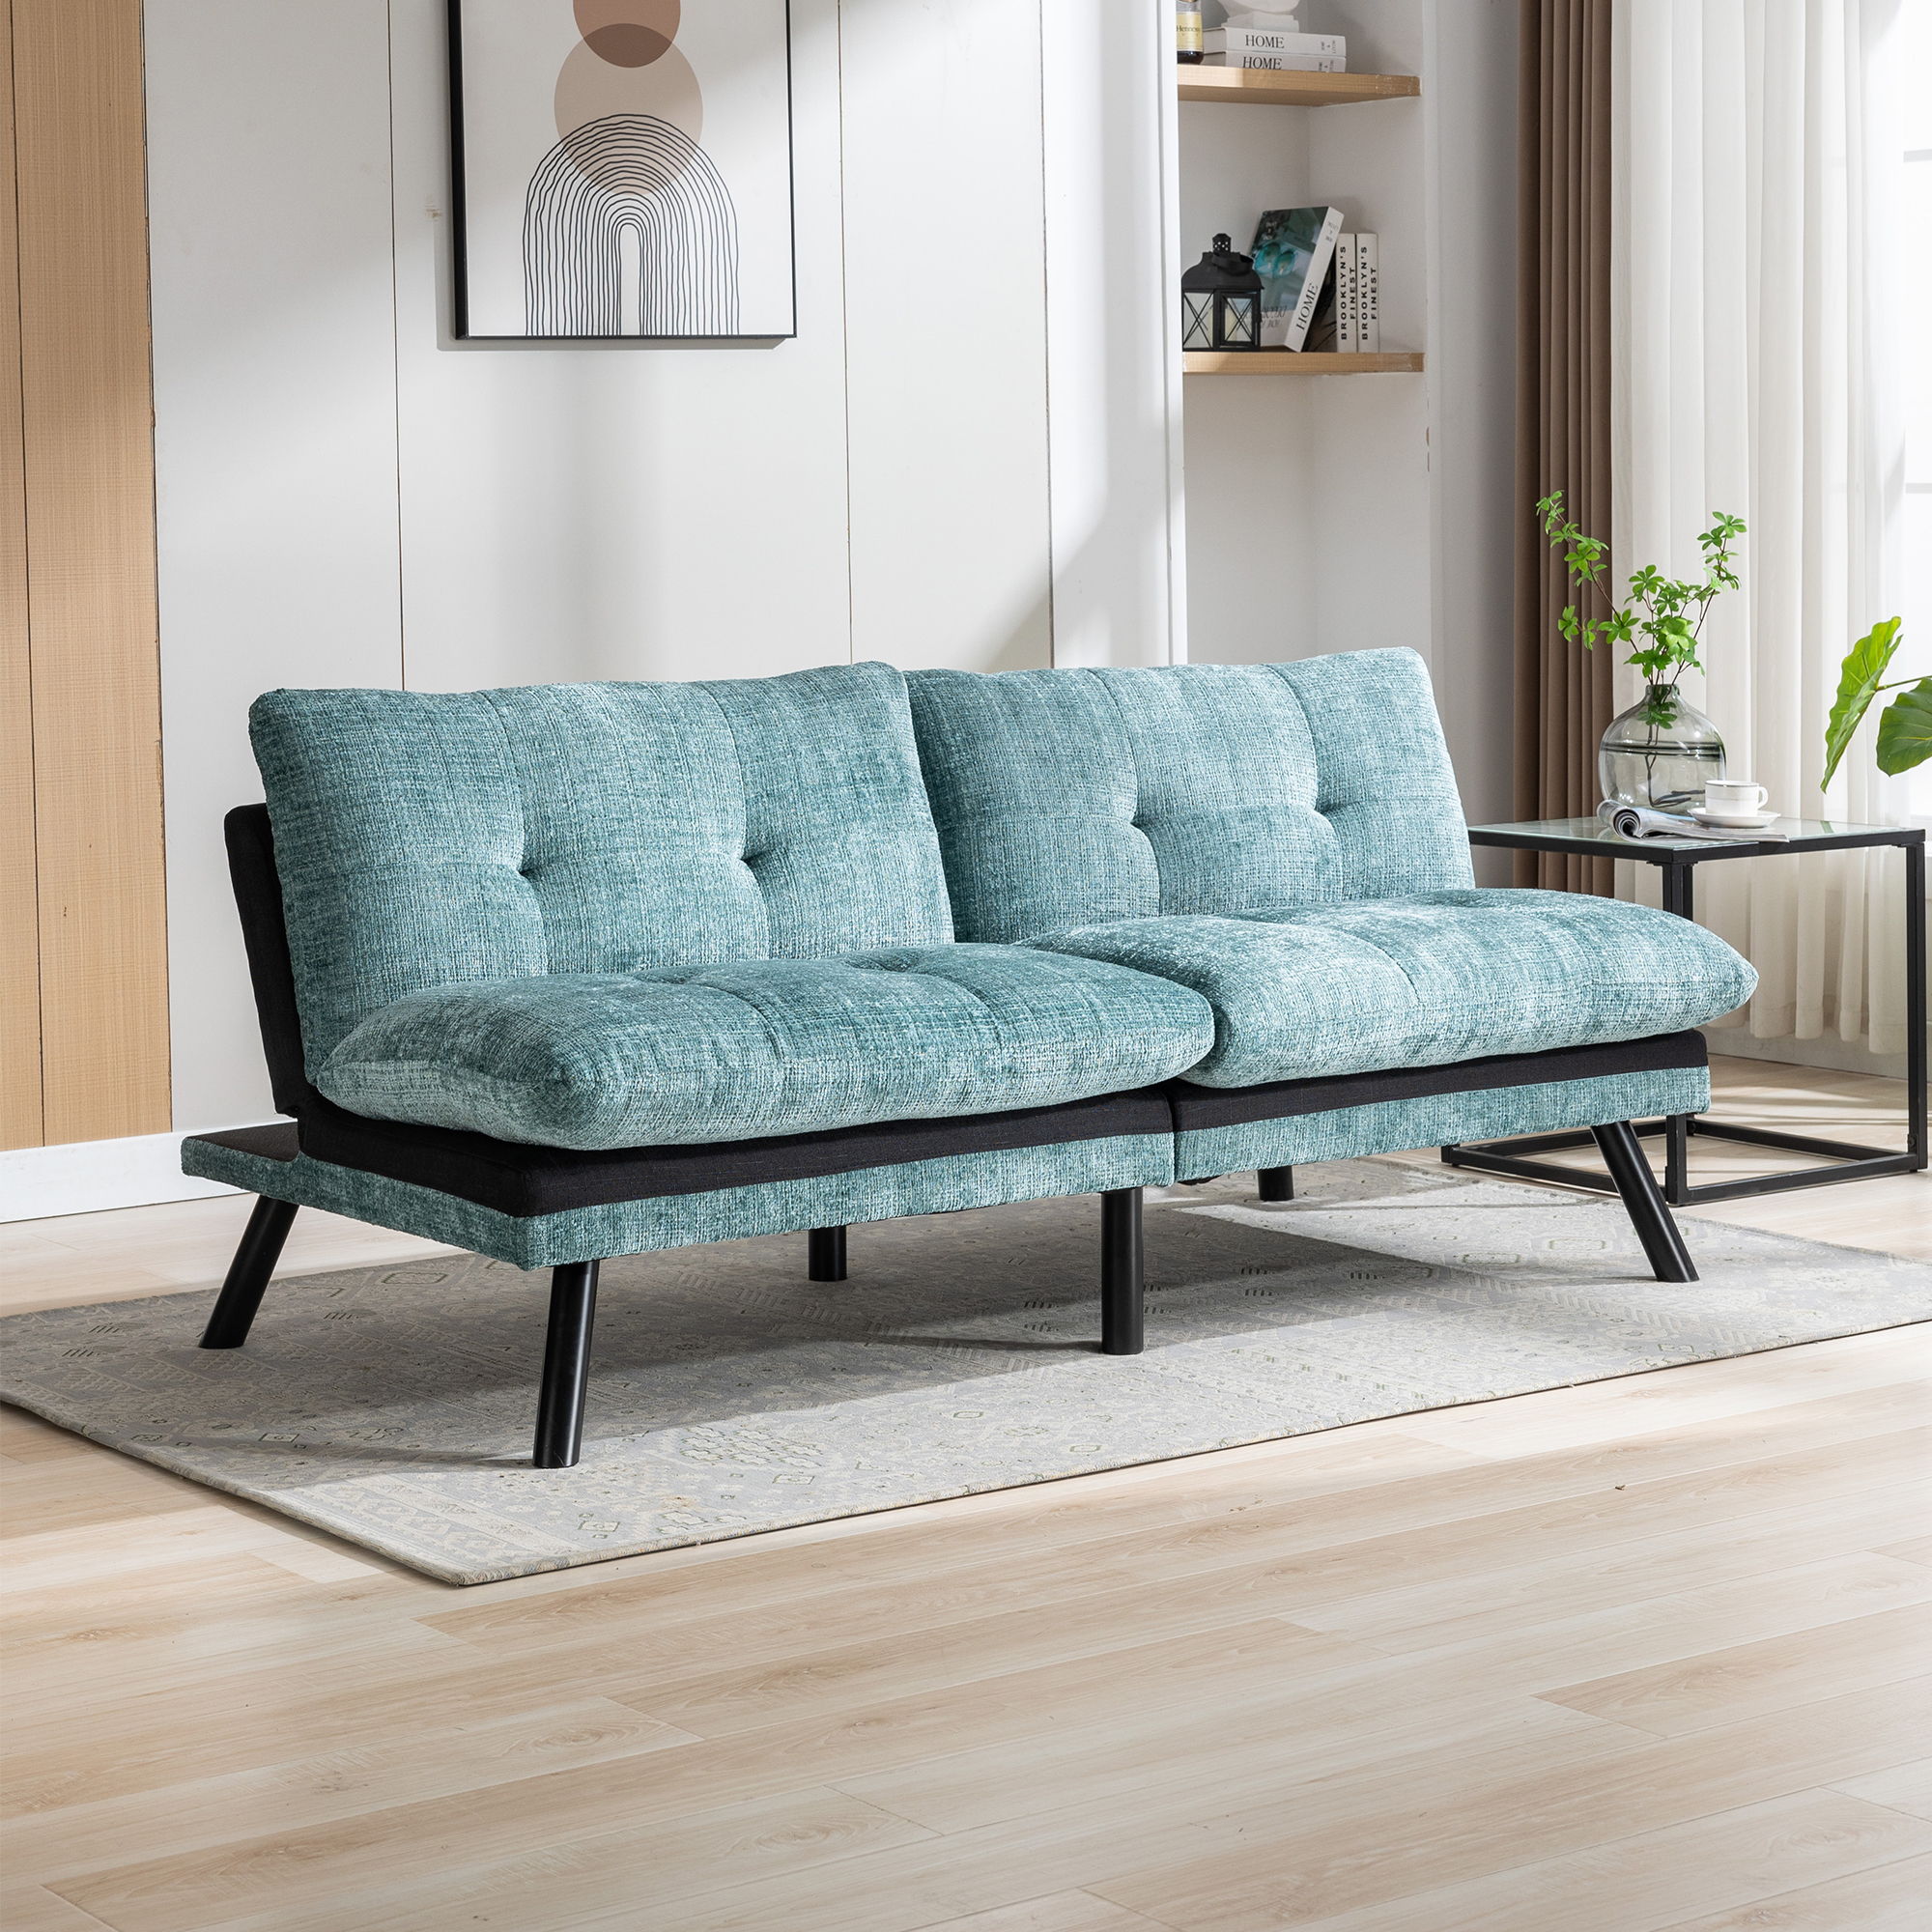 Convertible Sofa Bed Loveseat Futon Bed Breathable Adjustable Lounge Couch With Metal Legs, Futon Sets For Compact Living Space Chenille- Mint Green